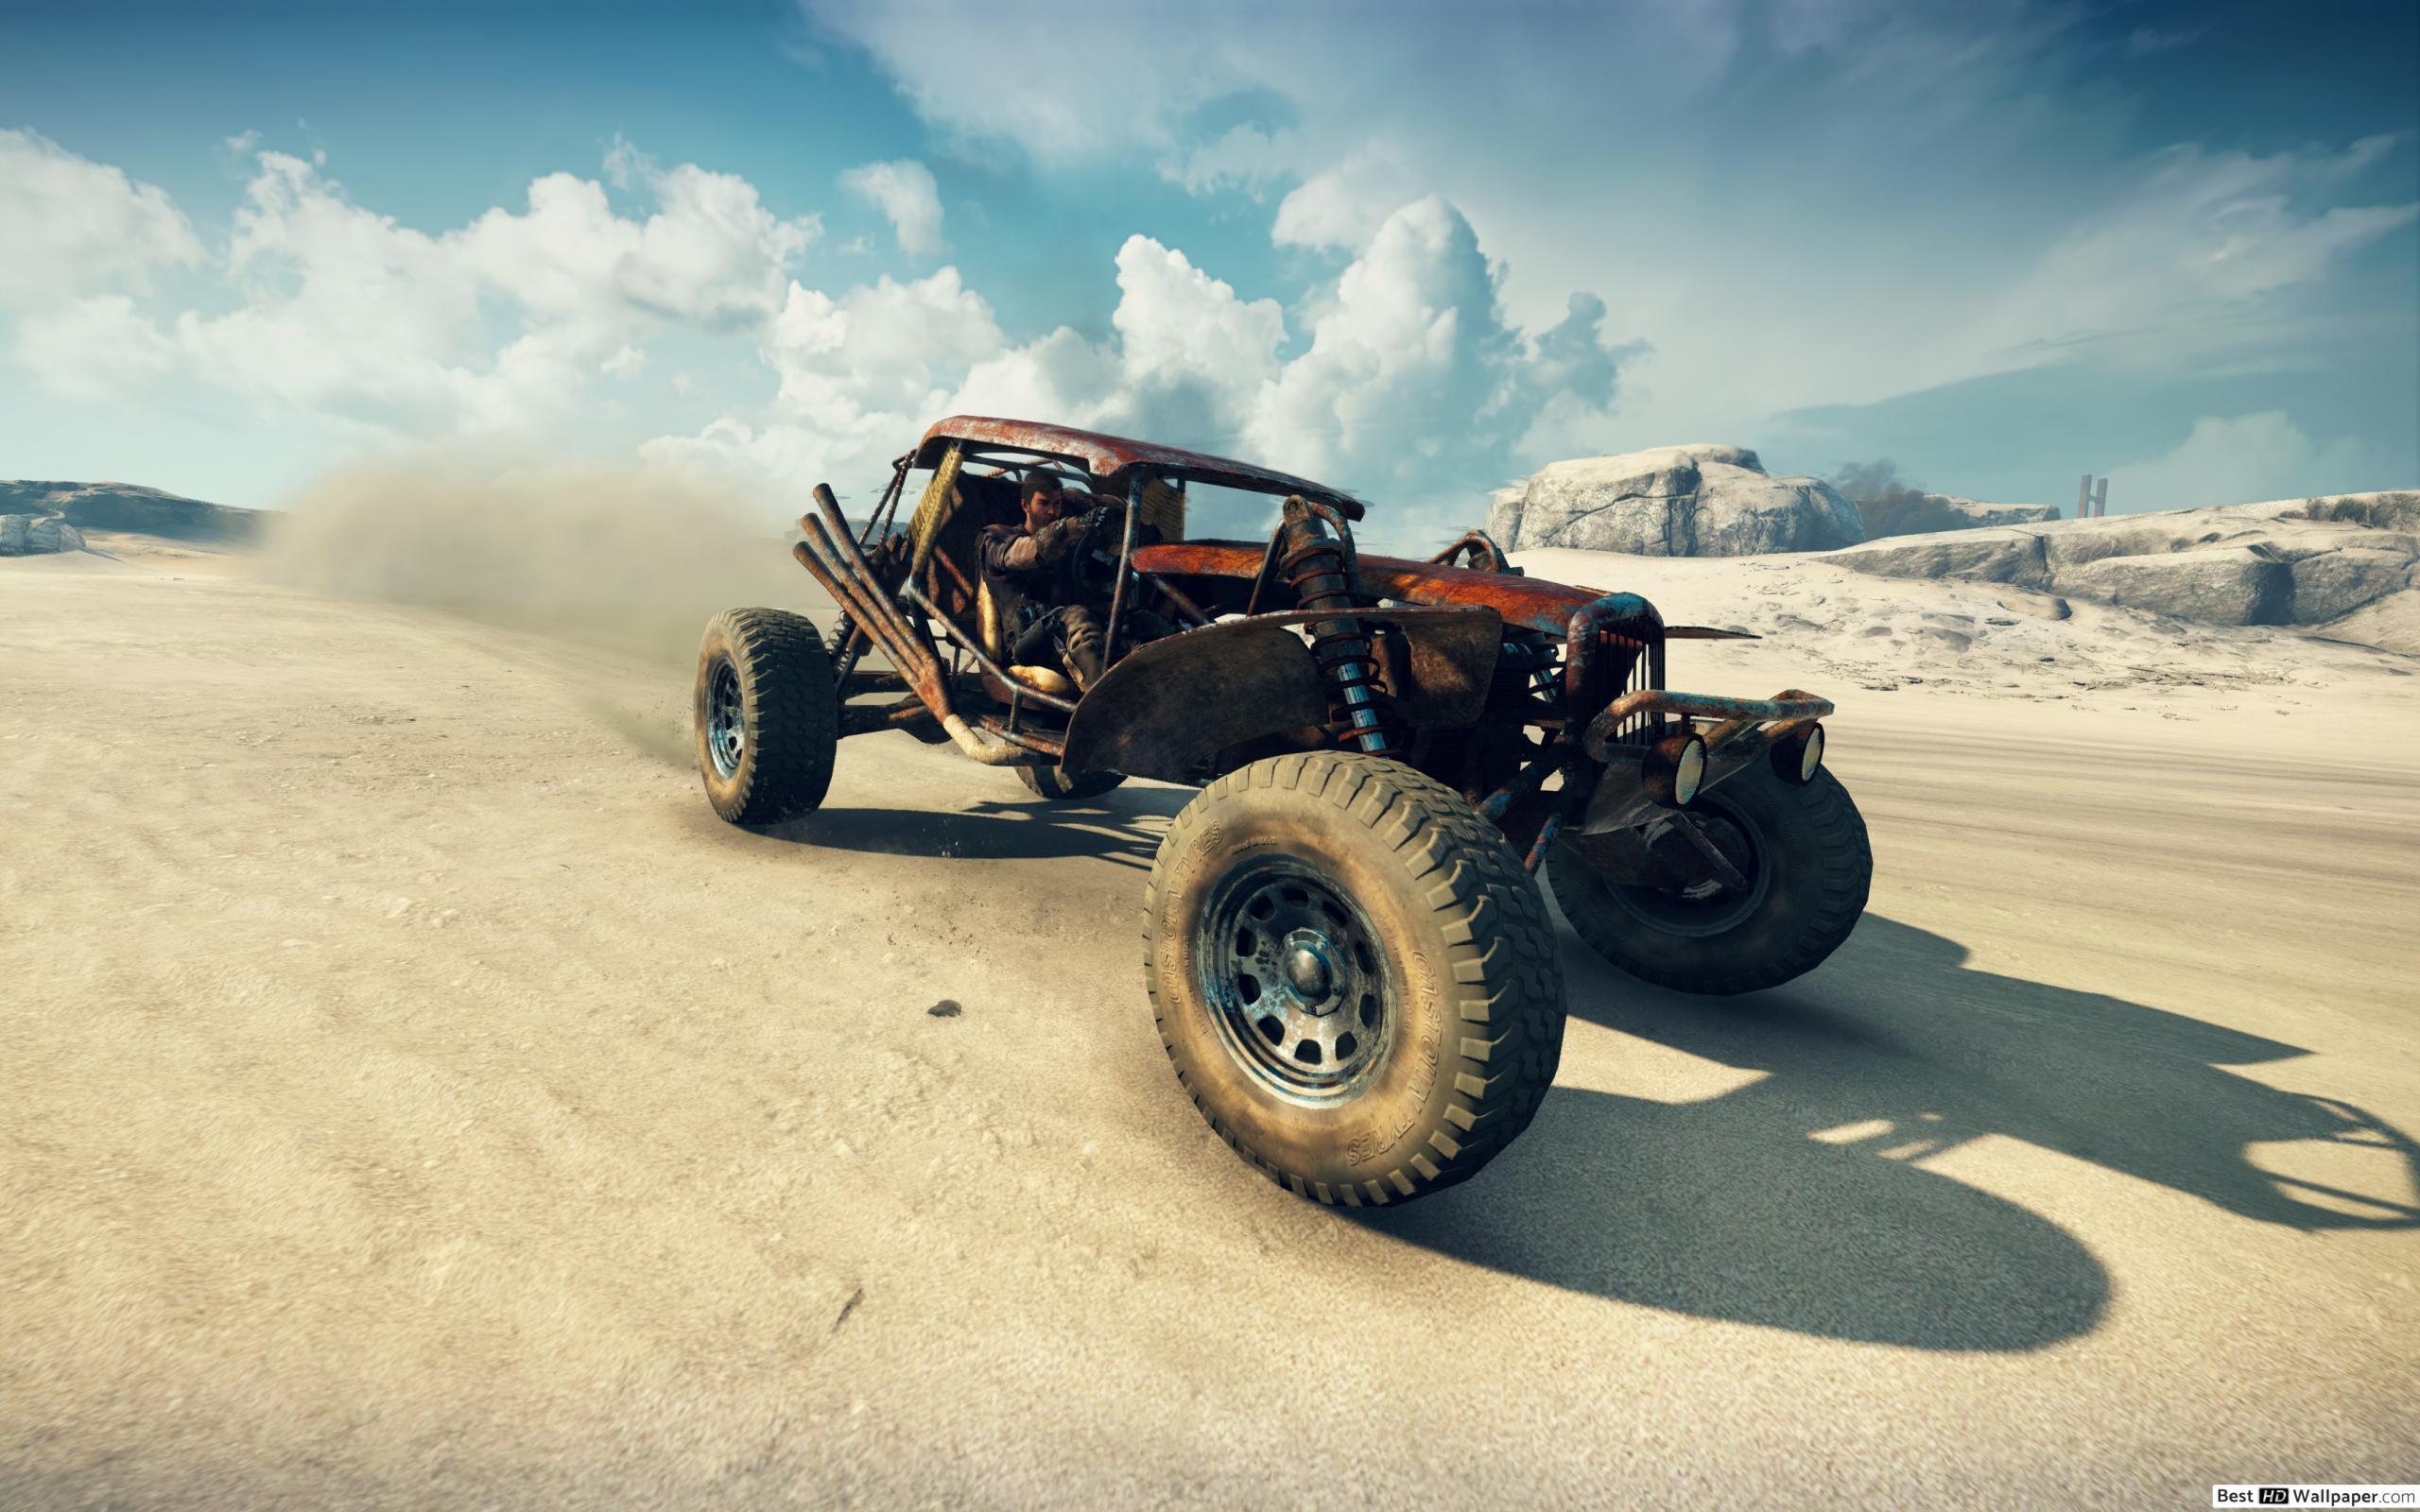 Dune Buggy of Mad Max HD wallpaper download